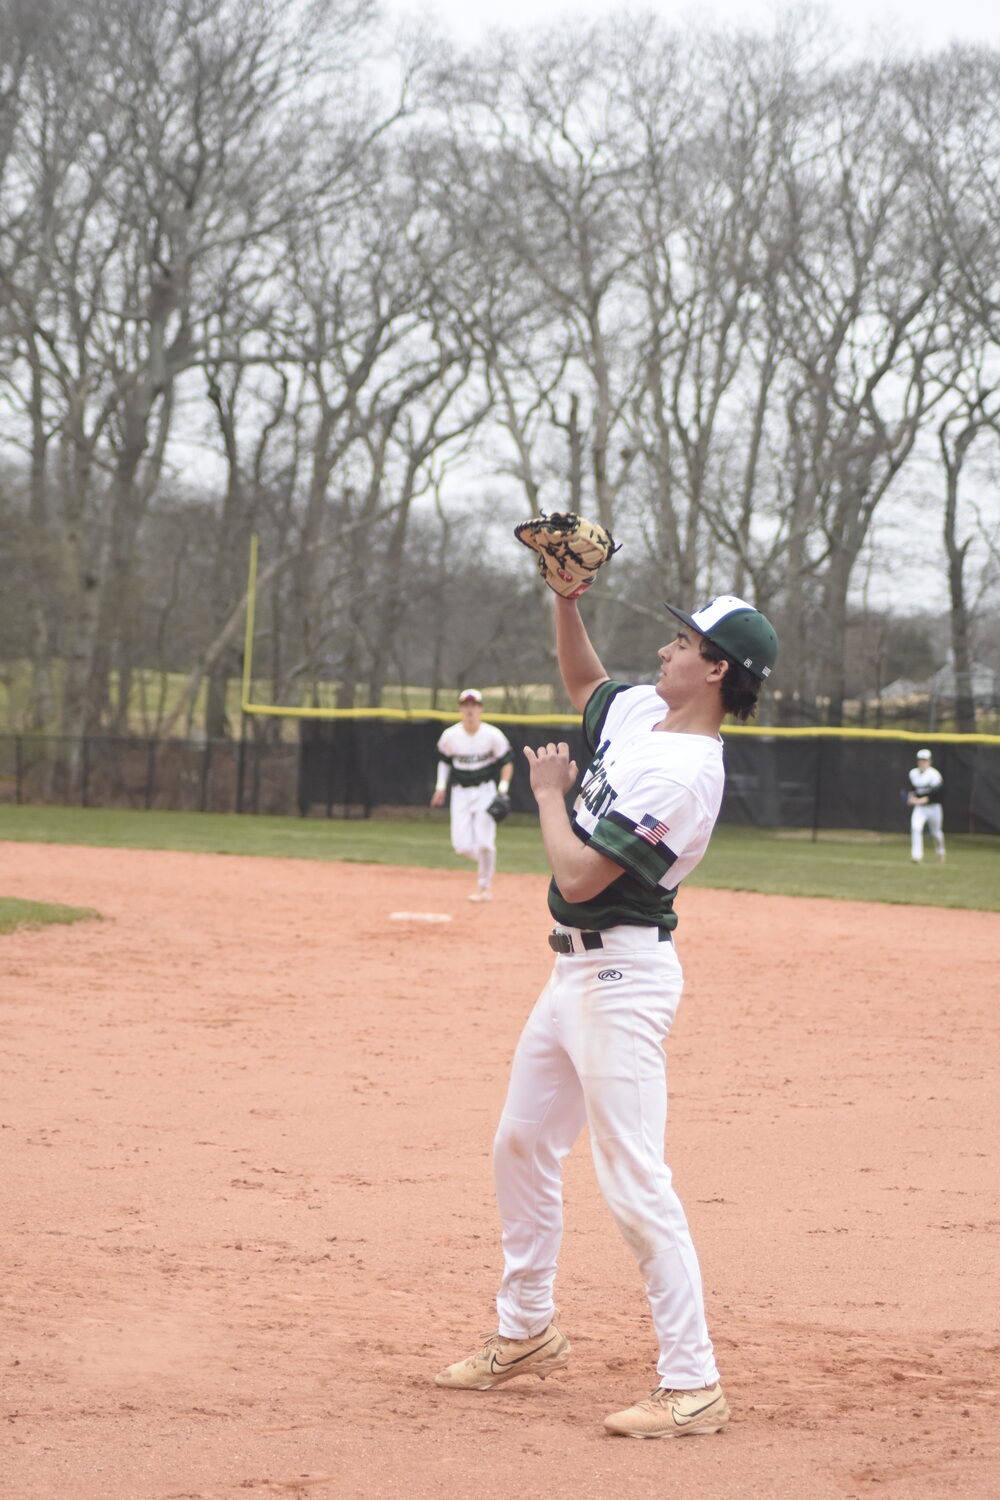 Westhampton Beach first baseman Jude Allen lines up a fly ball in the infield and catches it for an out.   DREW BUDD